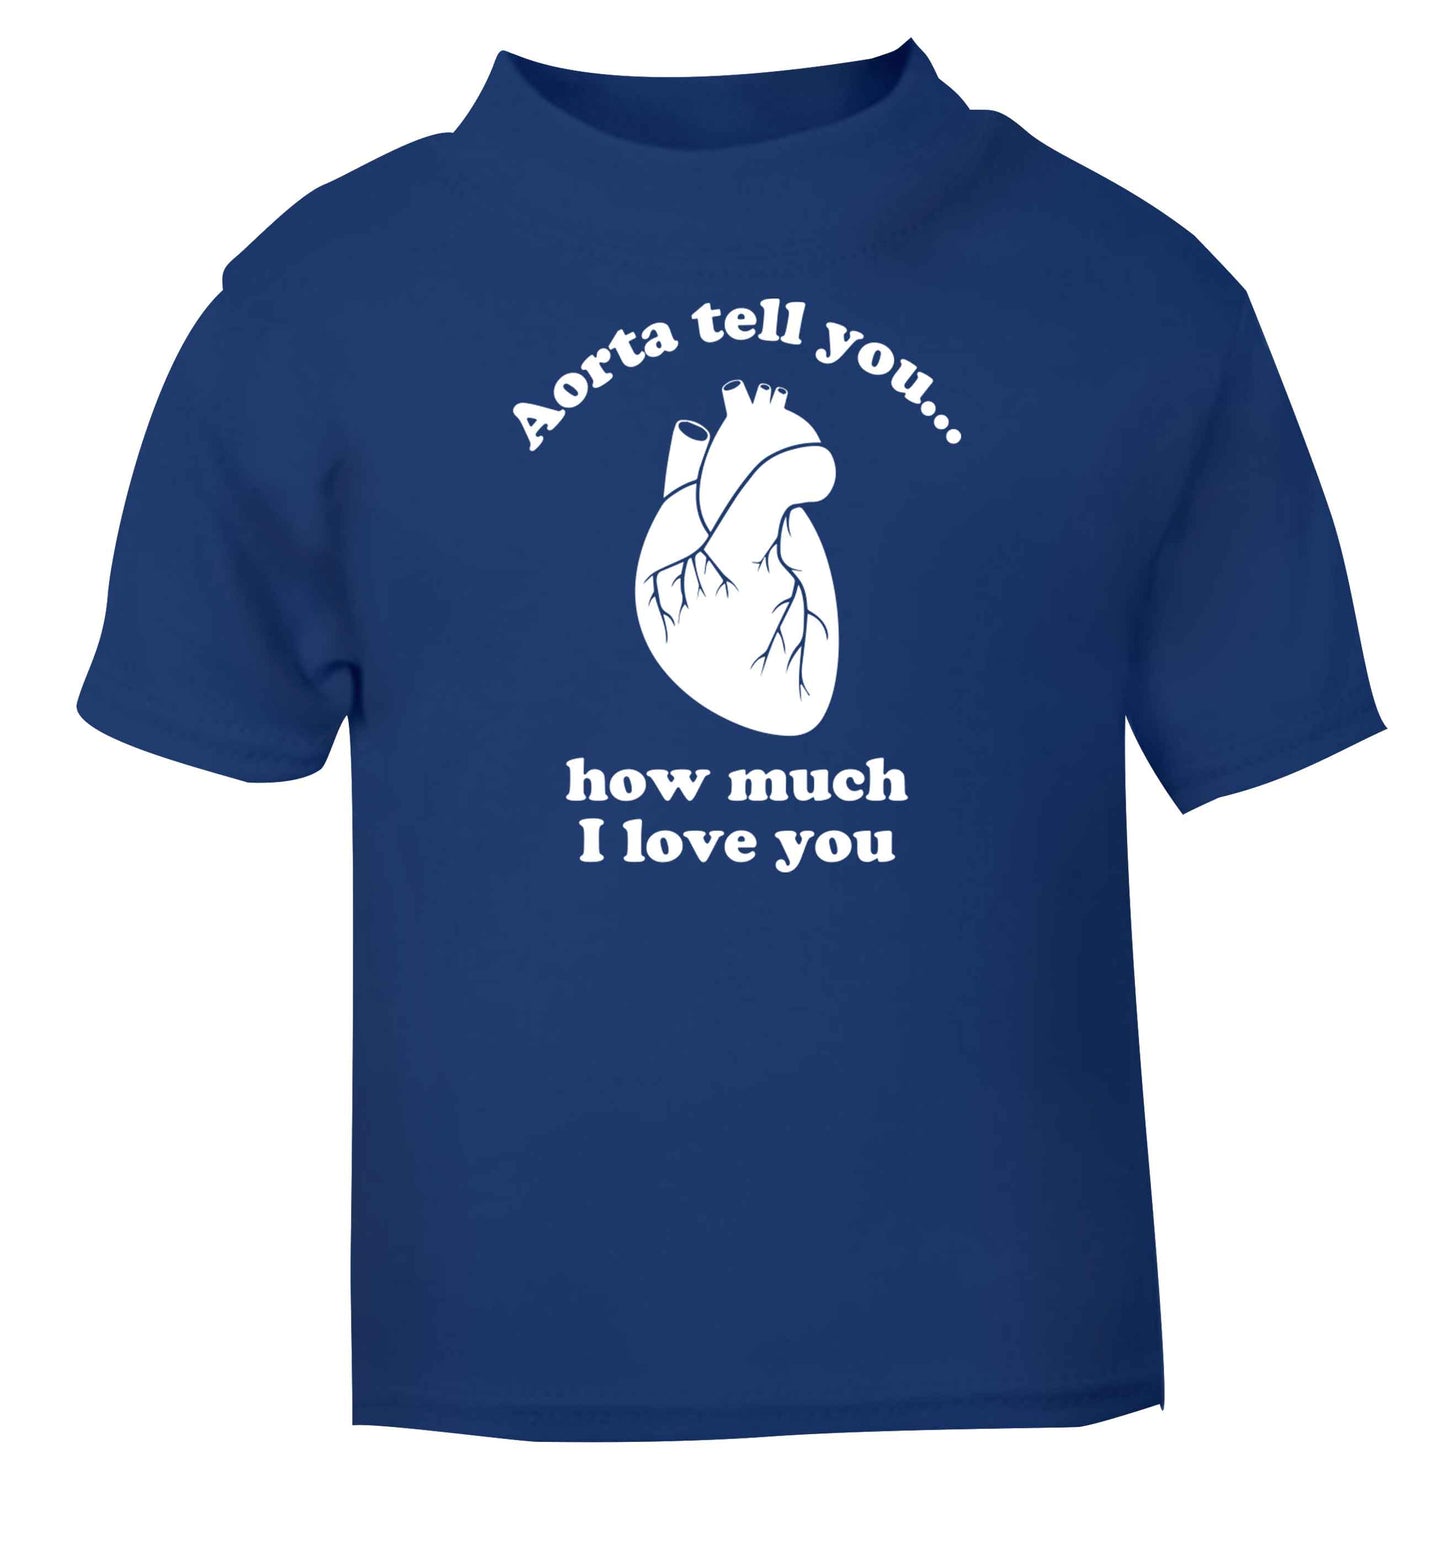 Aorta tell you how much I love you blue baby toddler Tshirt 2 Years